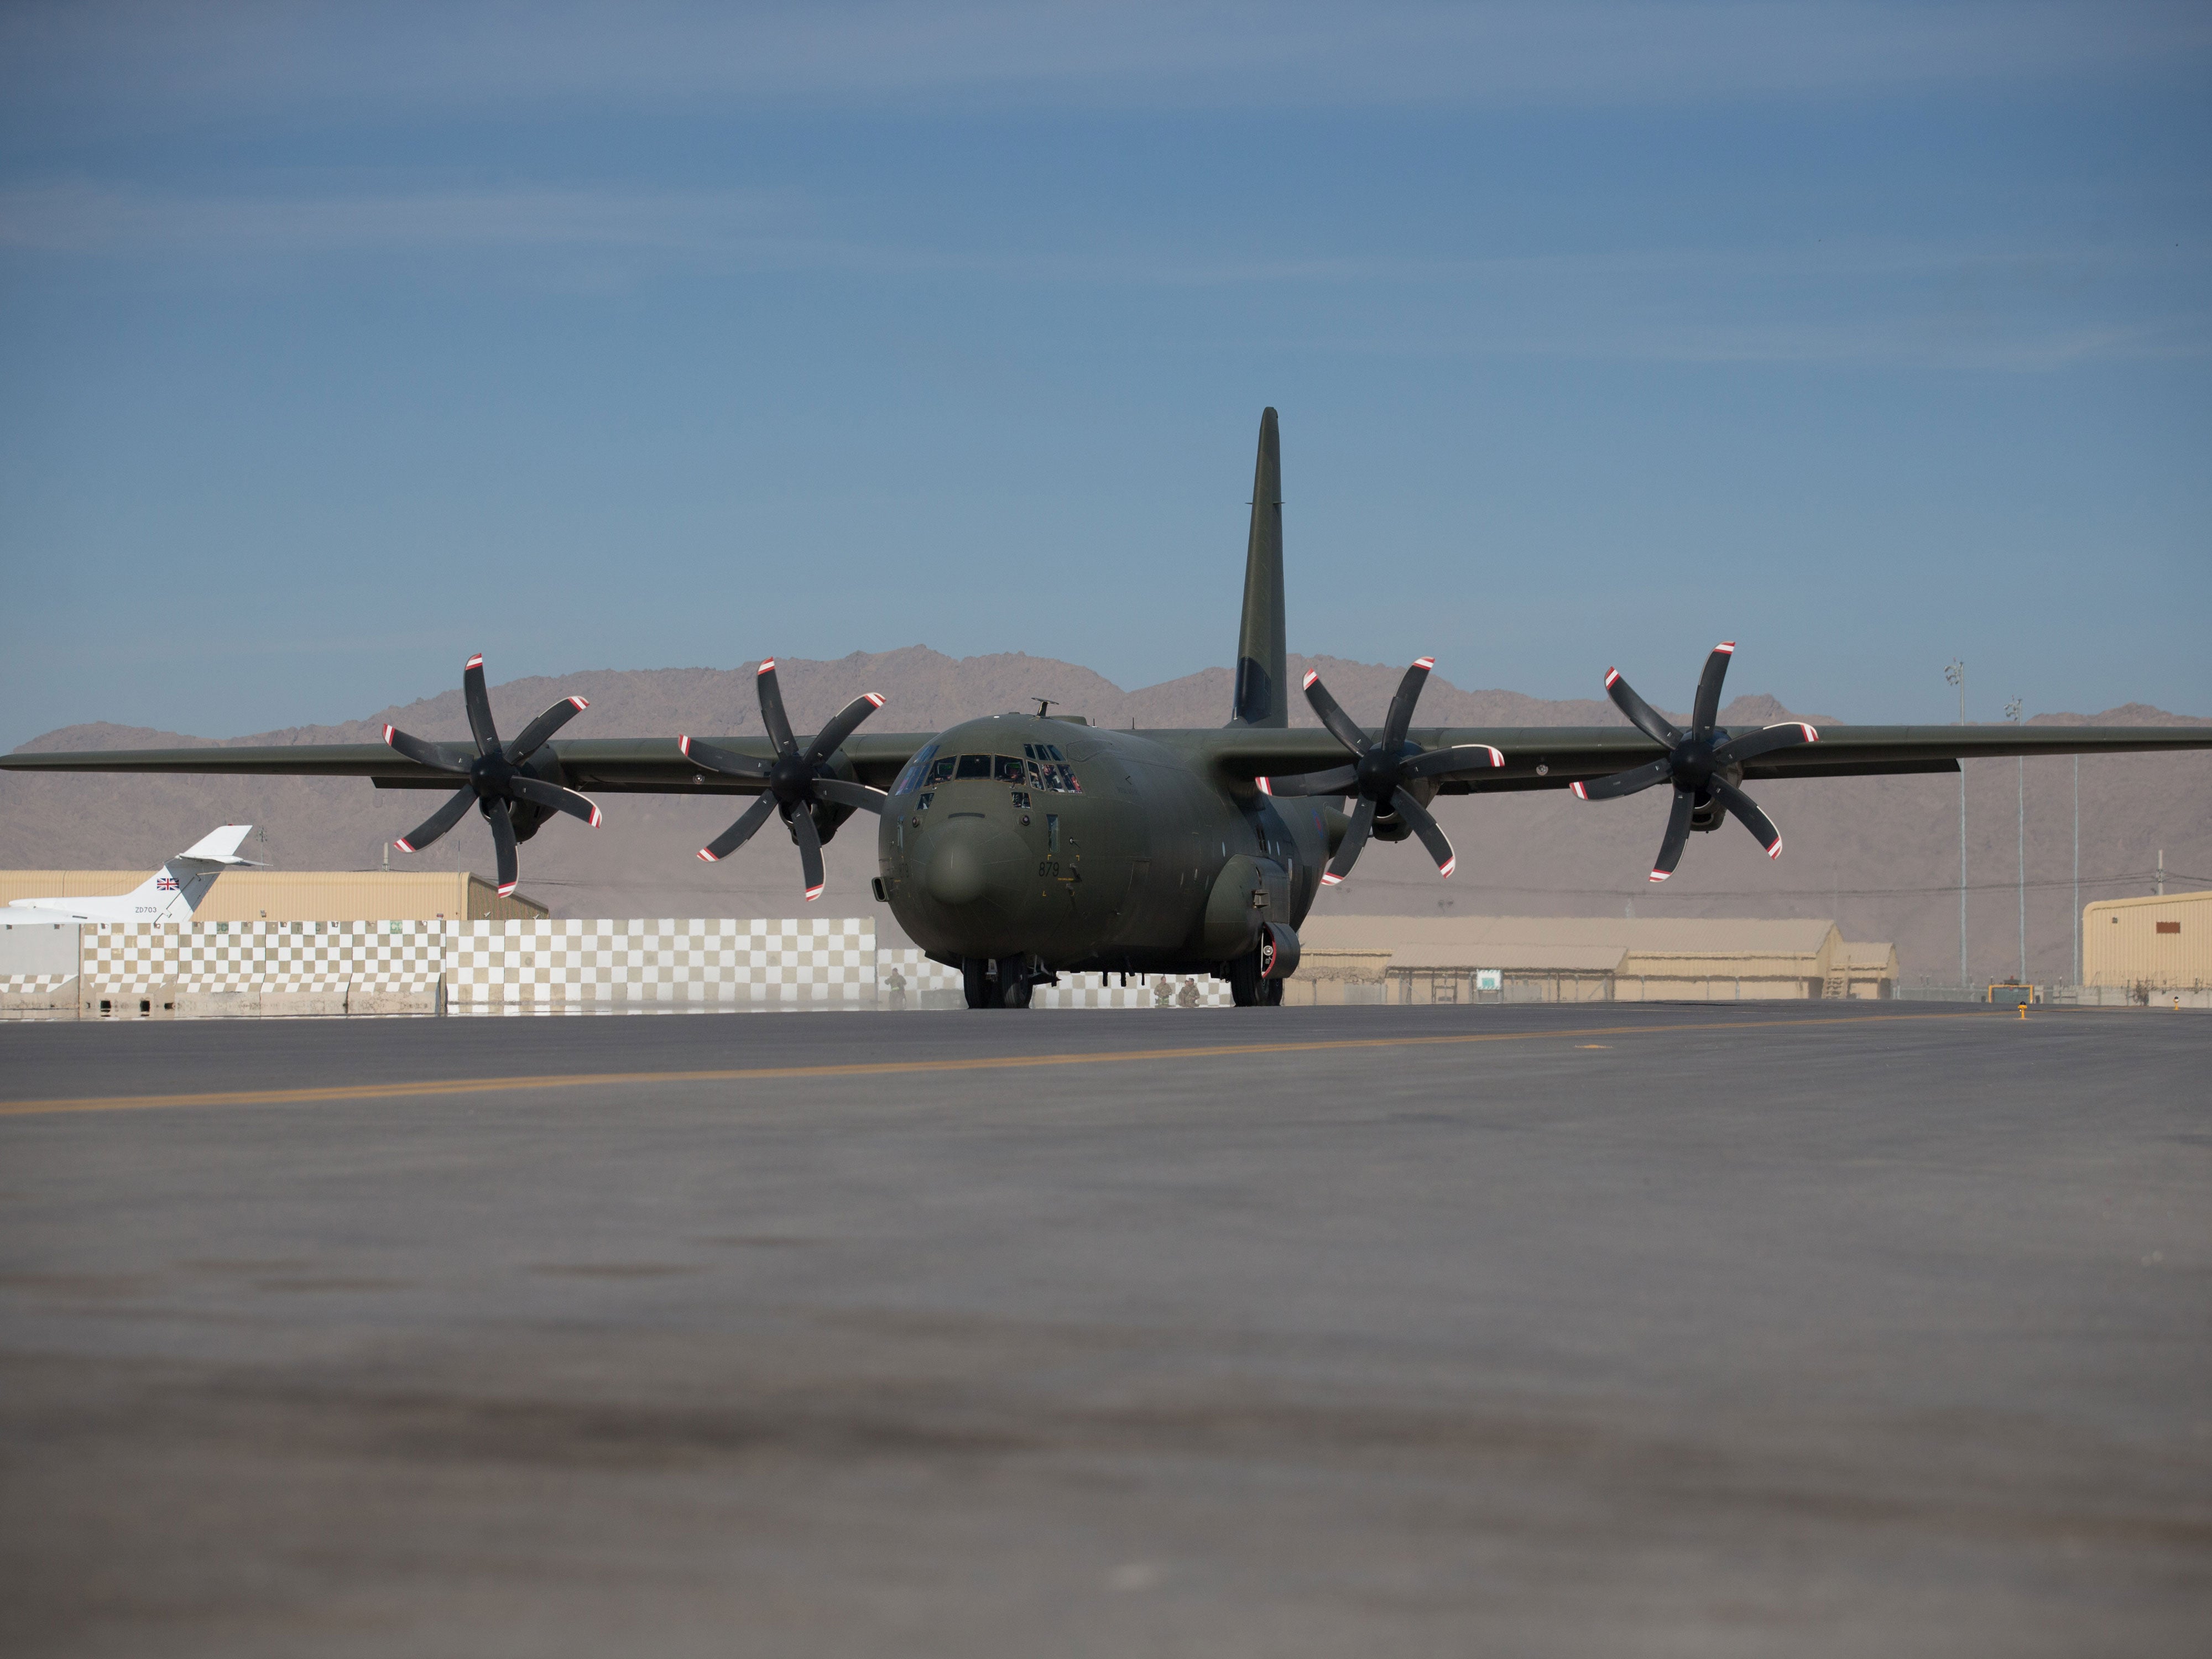 A US Hercules C-130 similar to the one that crashed